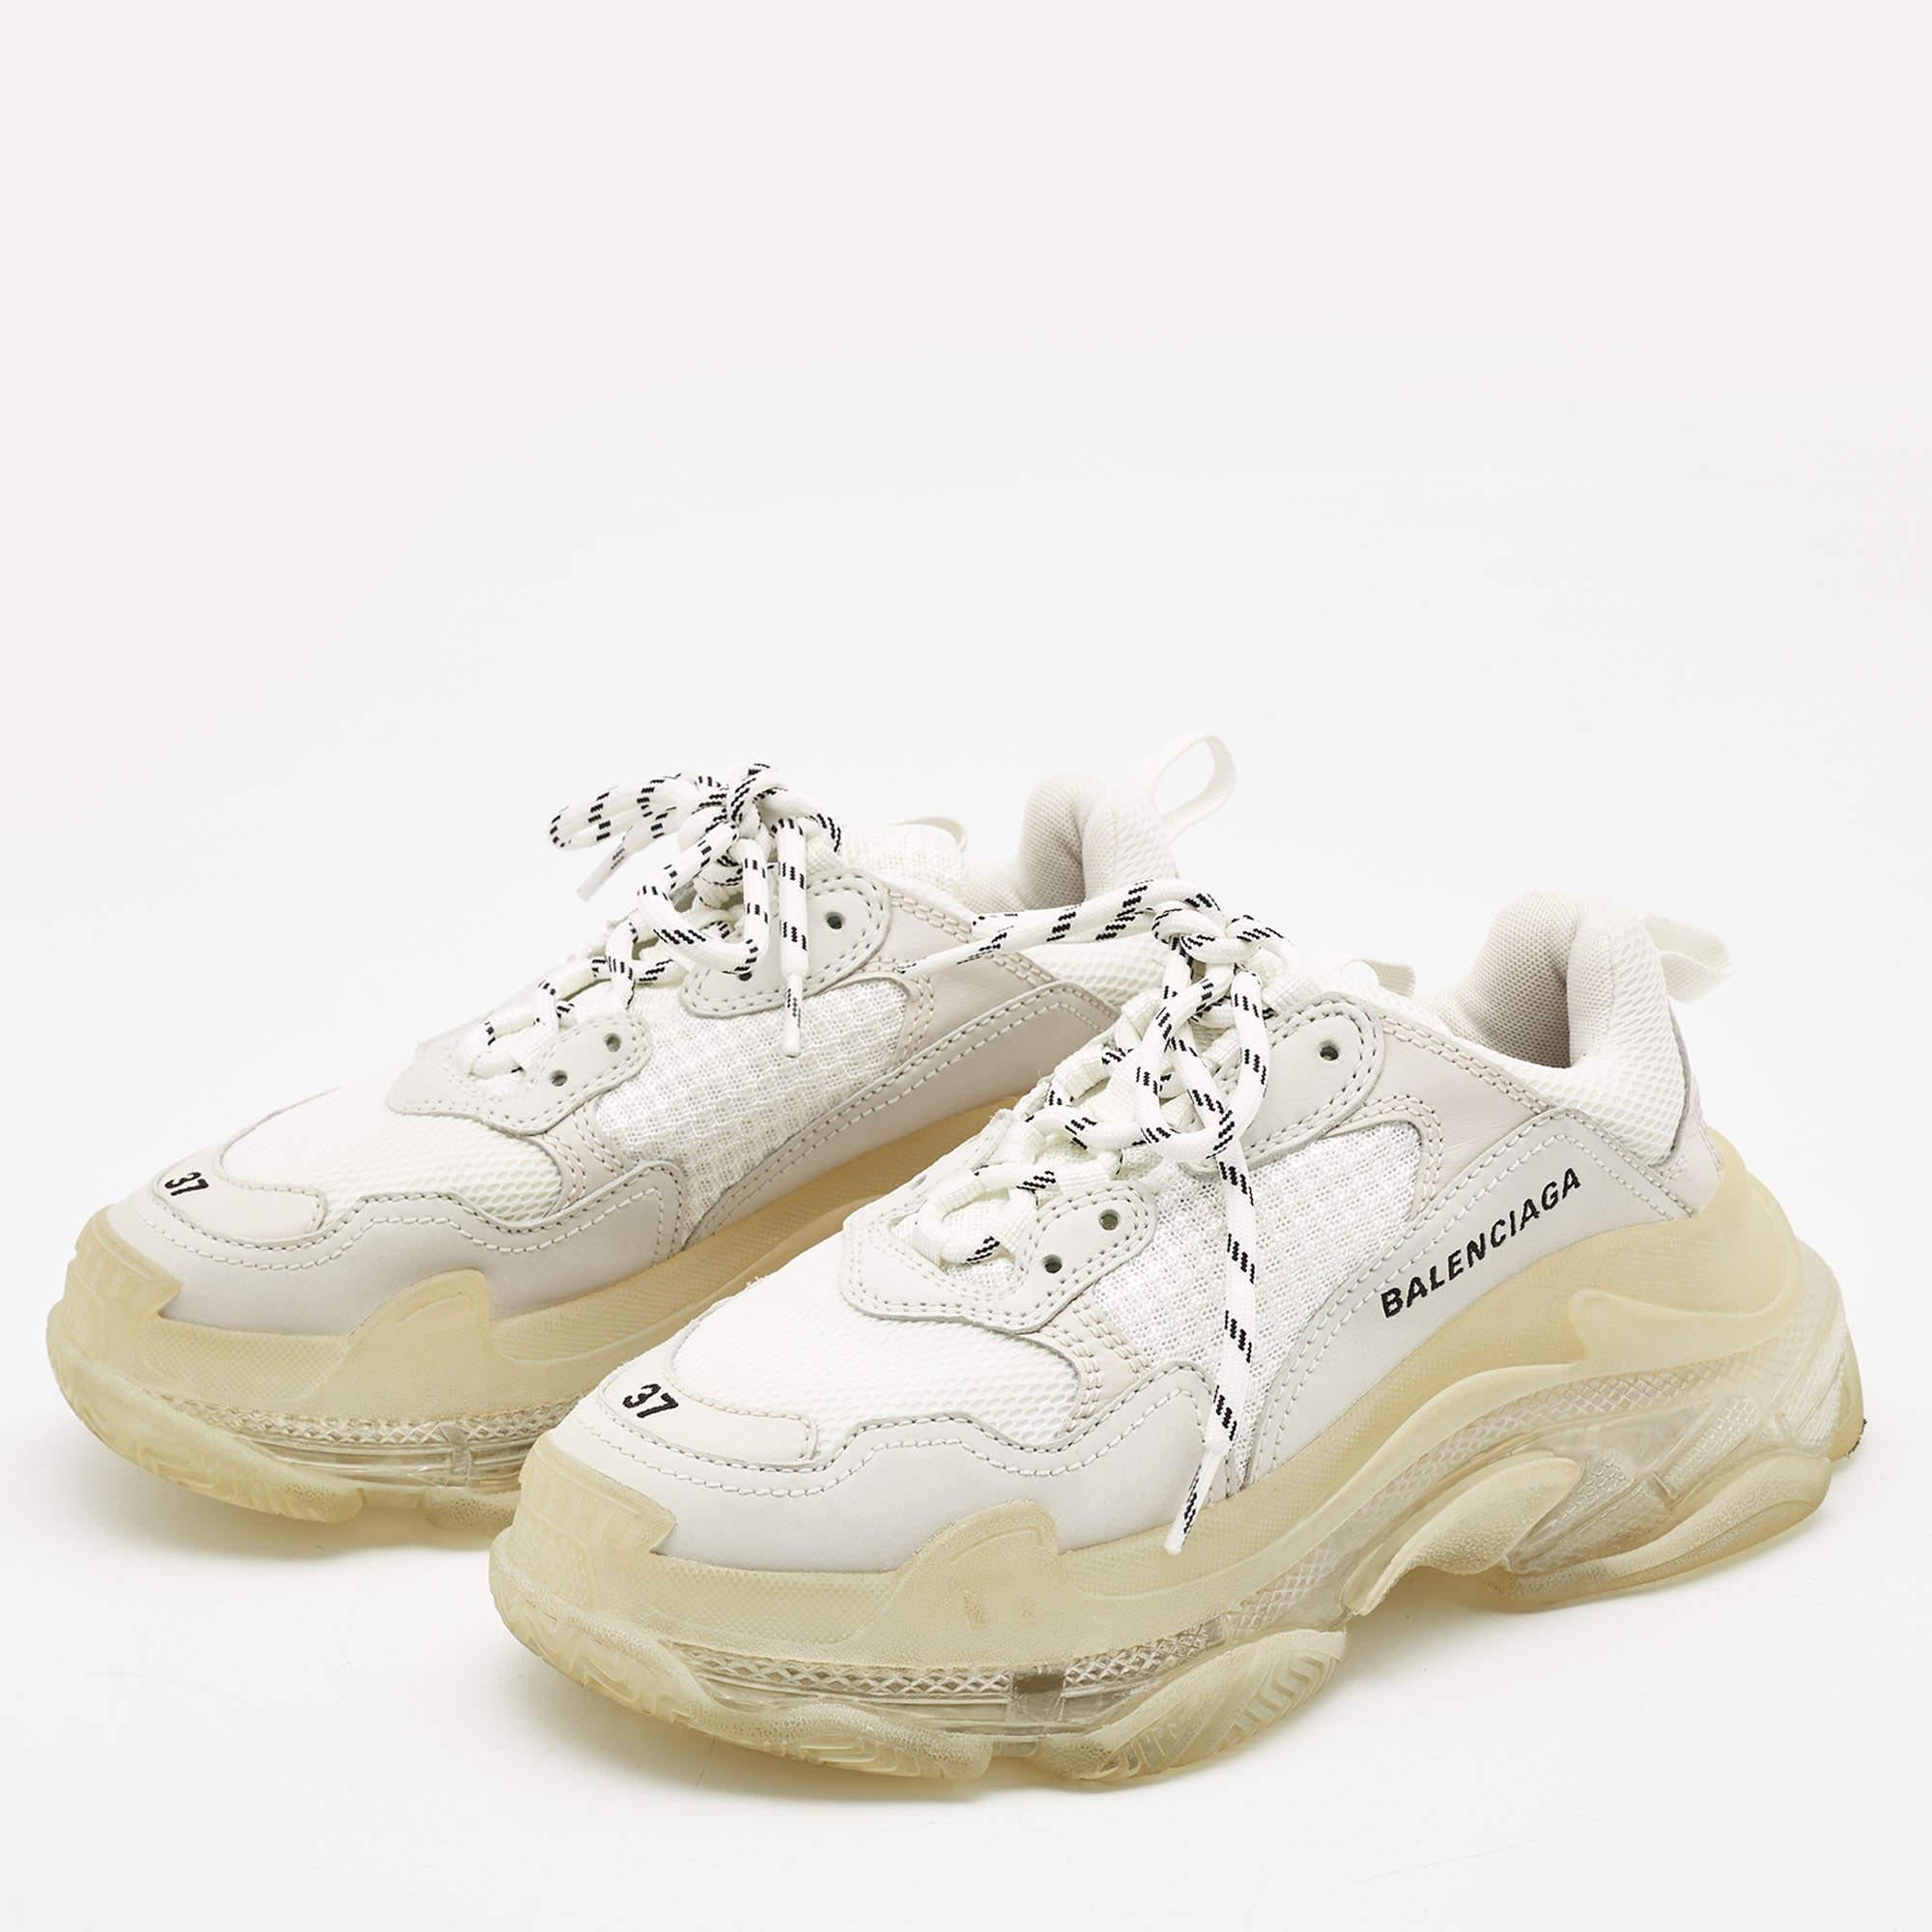 One of Balenciaga's many hit designs, the Triple S is a shoe that strays away from minimal forms and simple silhouettes. These are crafted from a mix of materials into a chunky size, achieved by the high complex soles. They feature the shoe size on